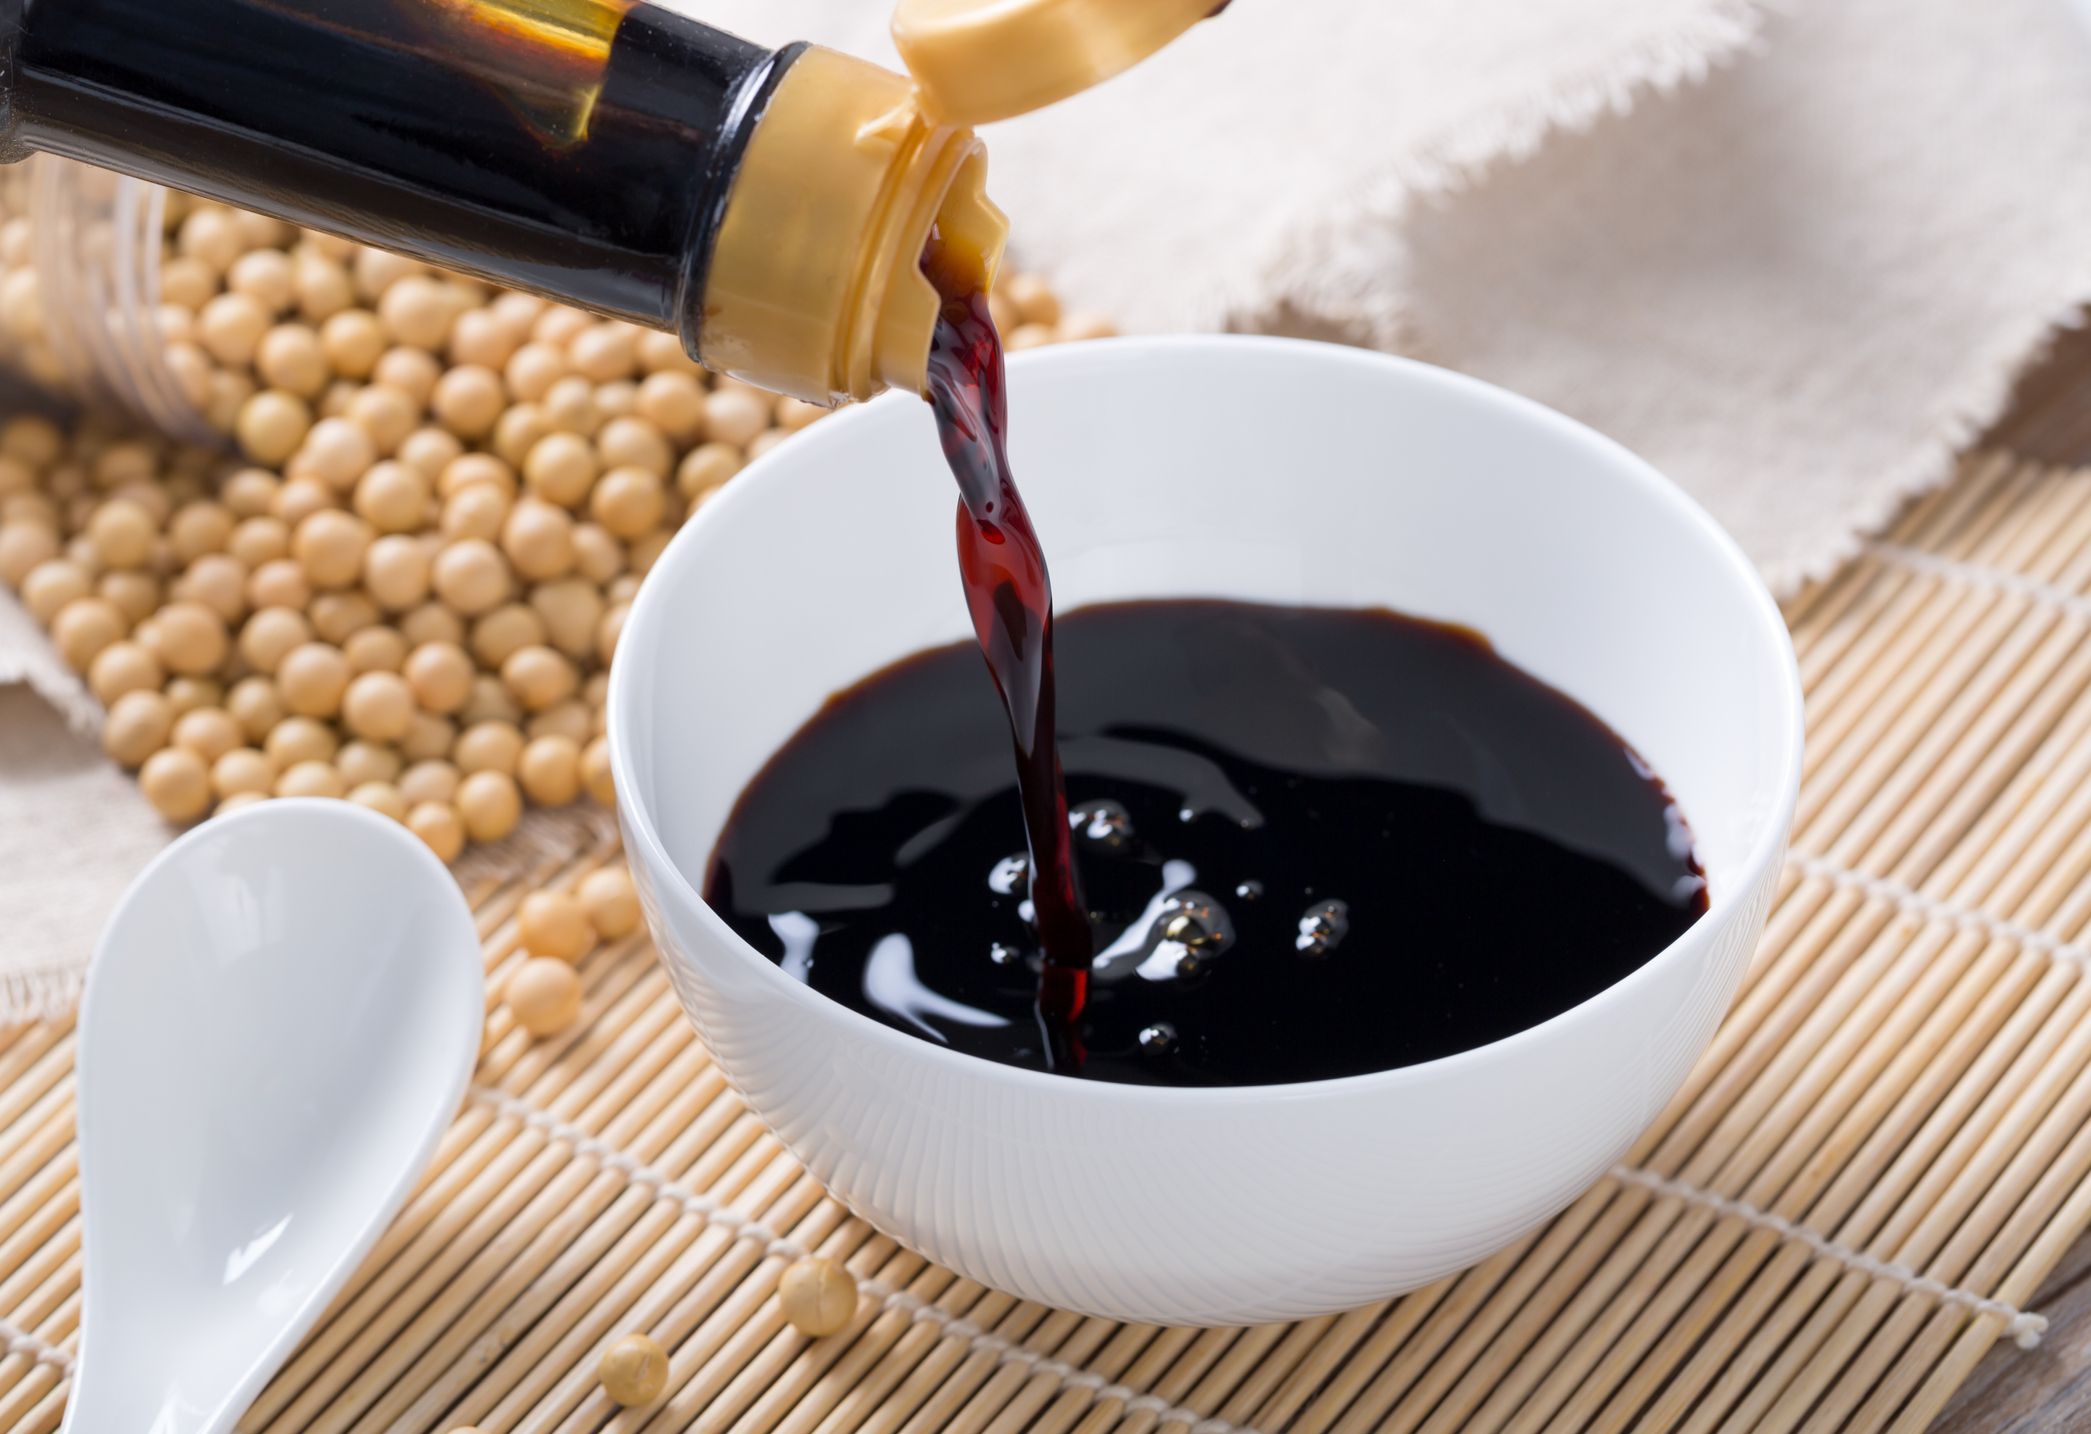 The history of soy sauce